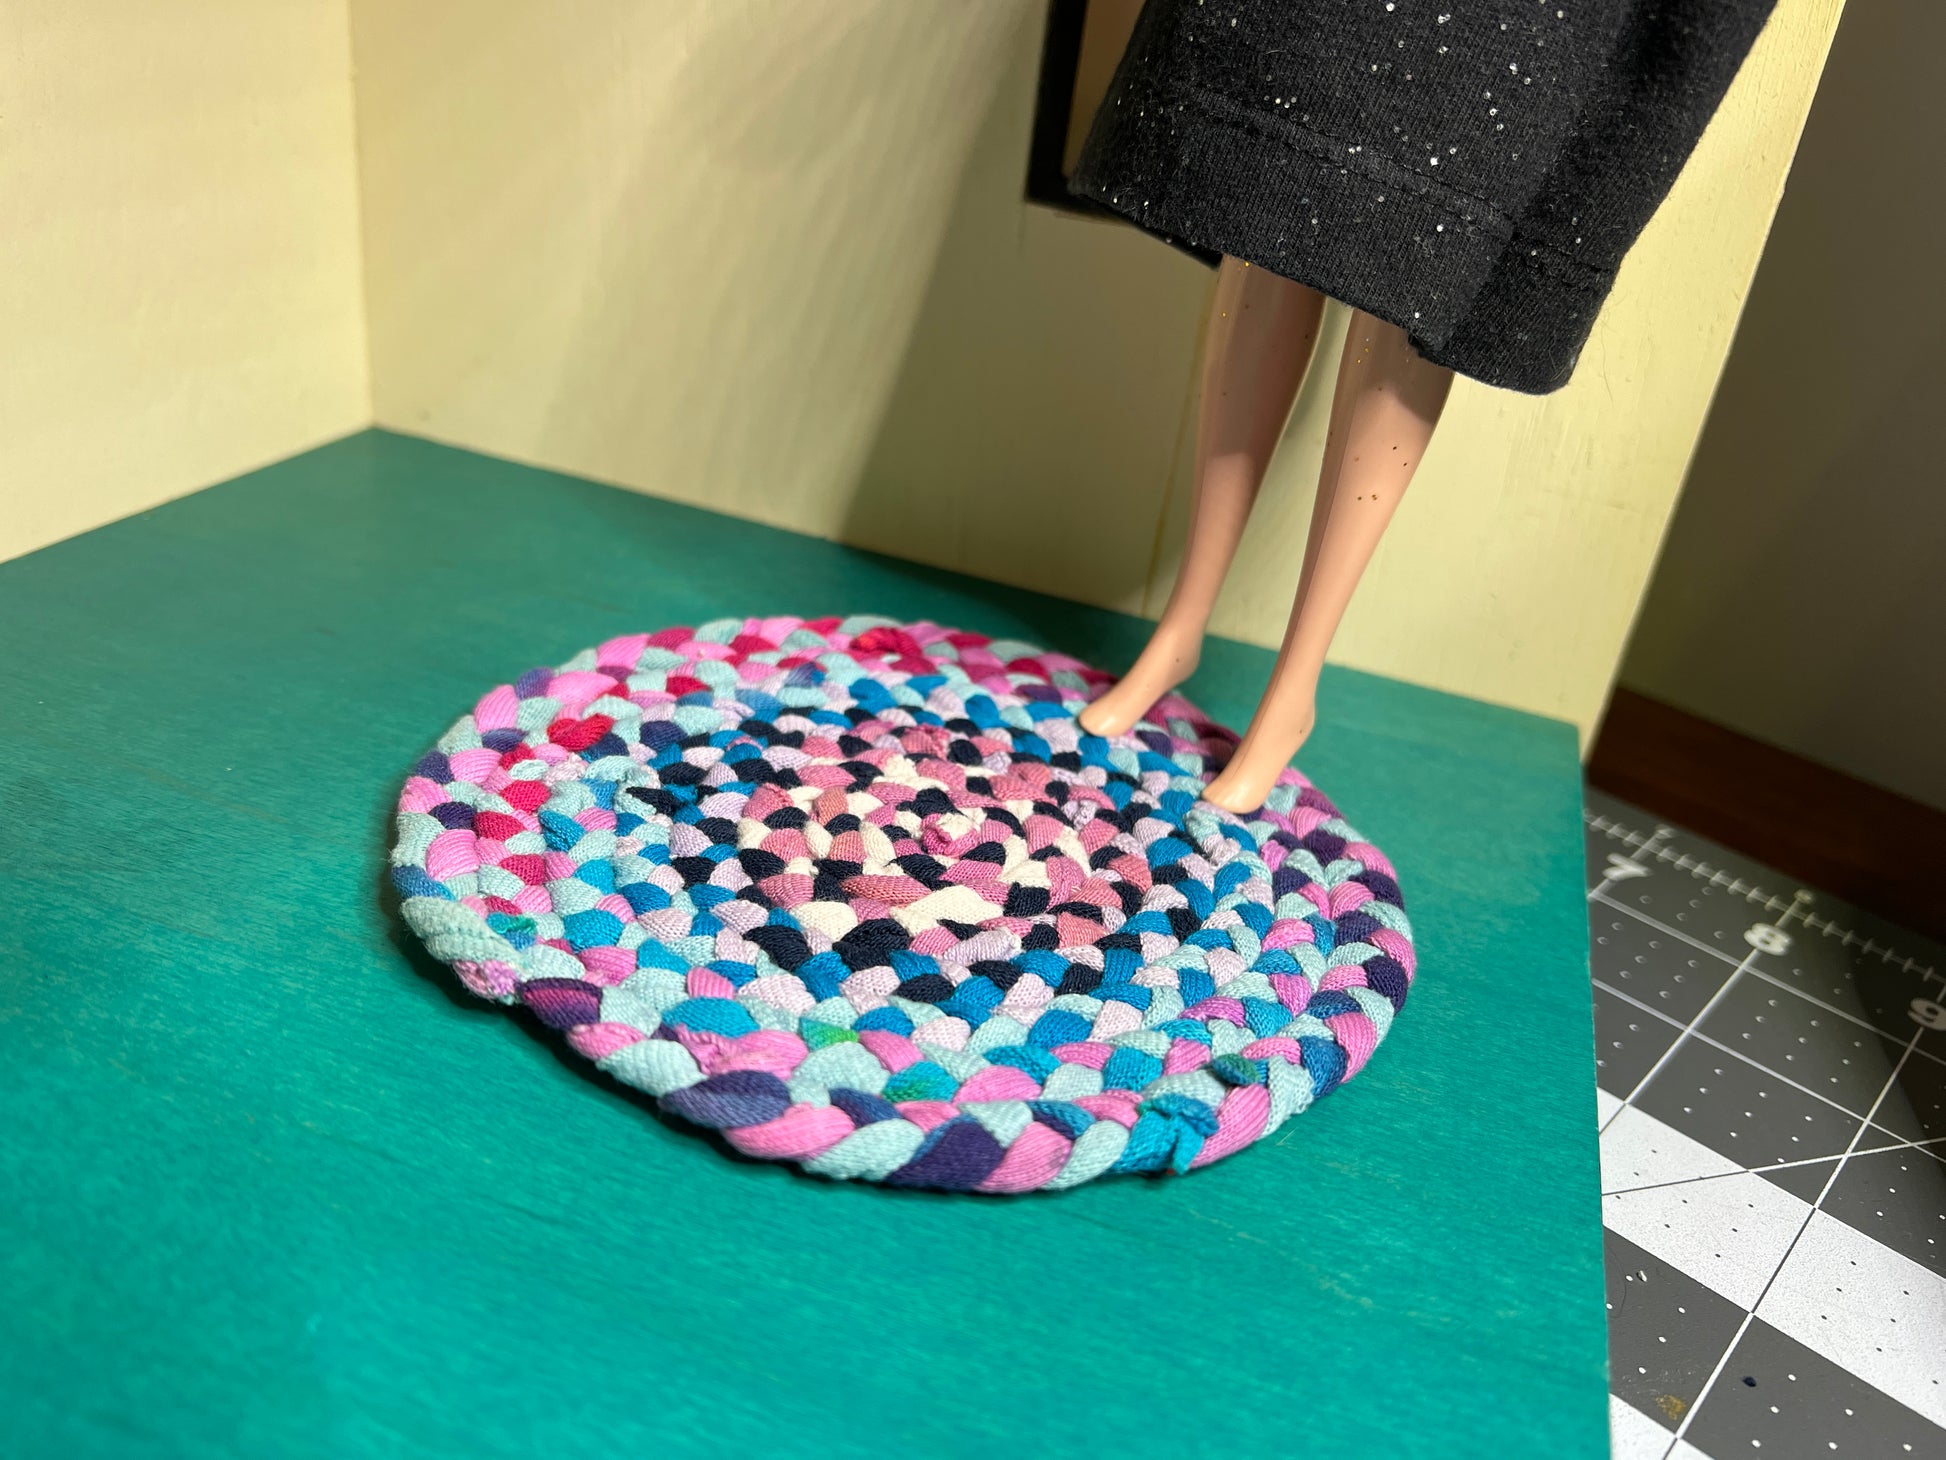 view of miniature rug in a room box, with Barbie standing atop the autumn colors rug for scale and display ideas